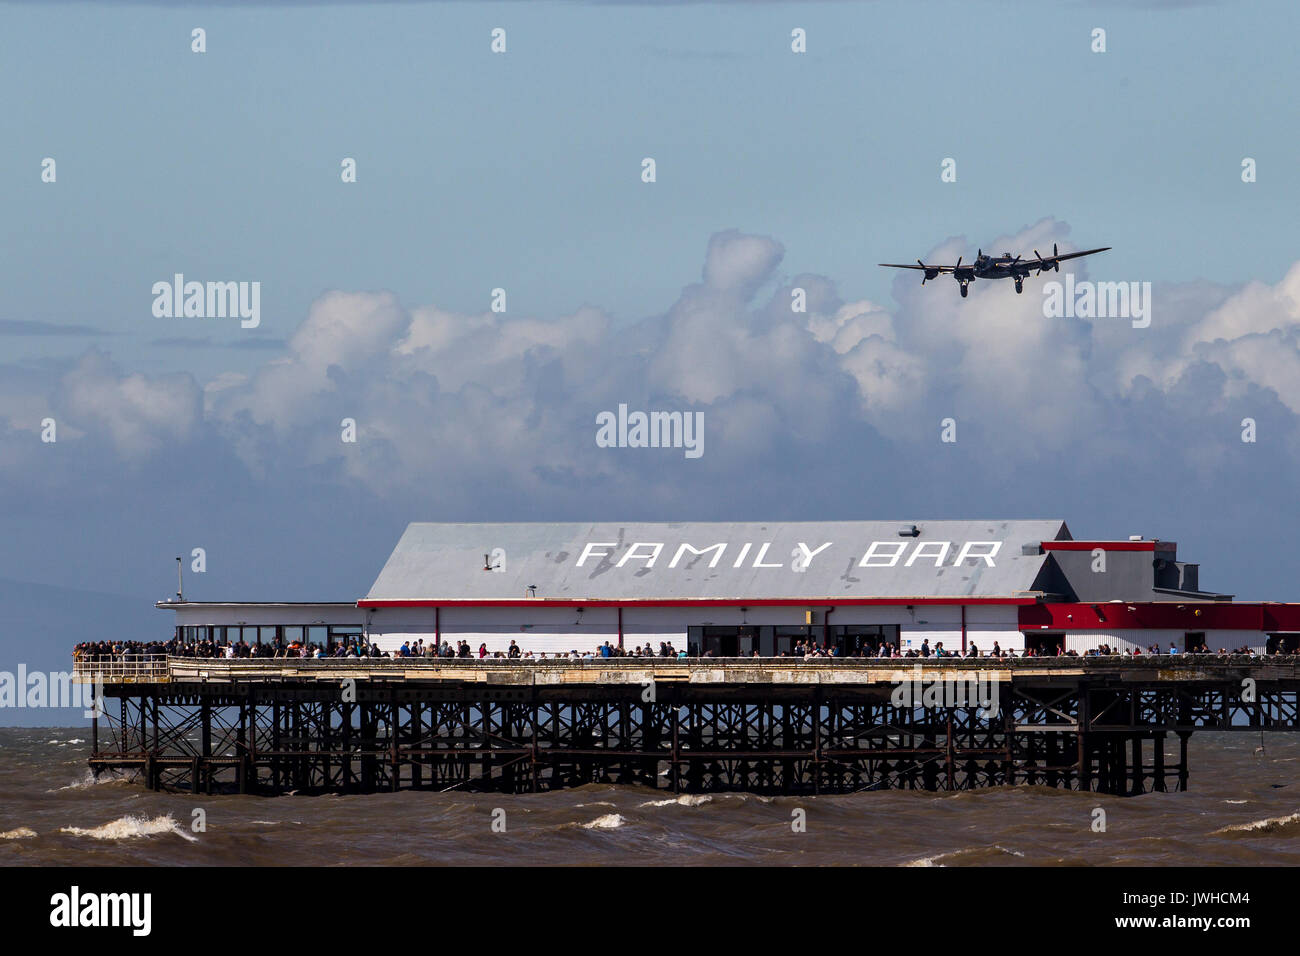 Blackpool, Lancashire, UK. 12th Aug, 2017. Lancaster from the Battle of Britain Memorial Flight over the Central Pier at Blackpool Credit: Russell Millner/Alamy Live News Stock Photo